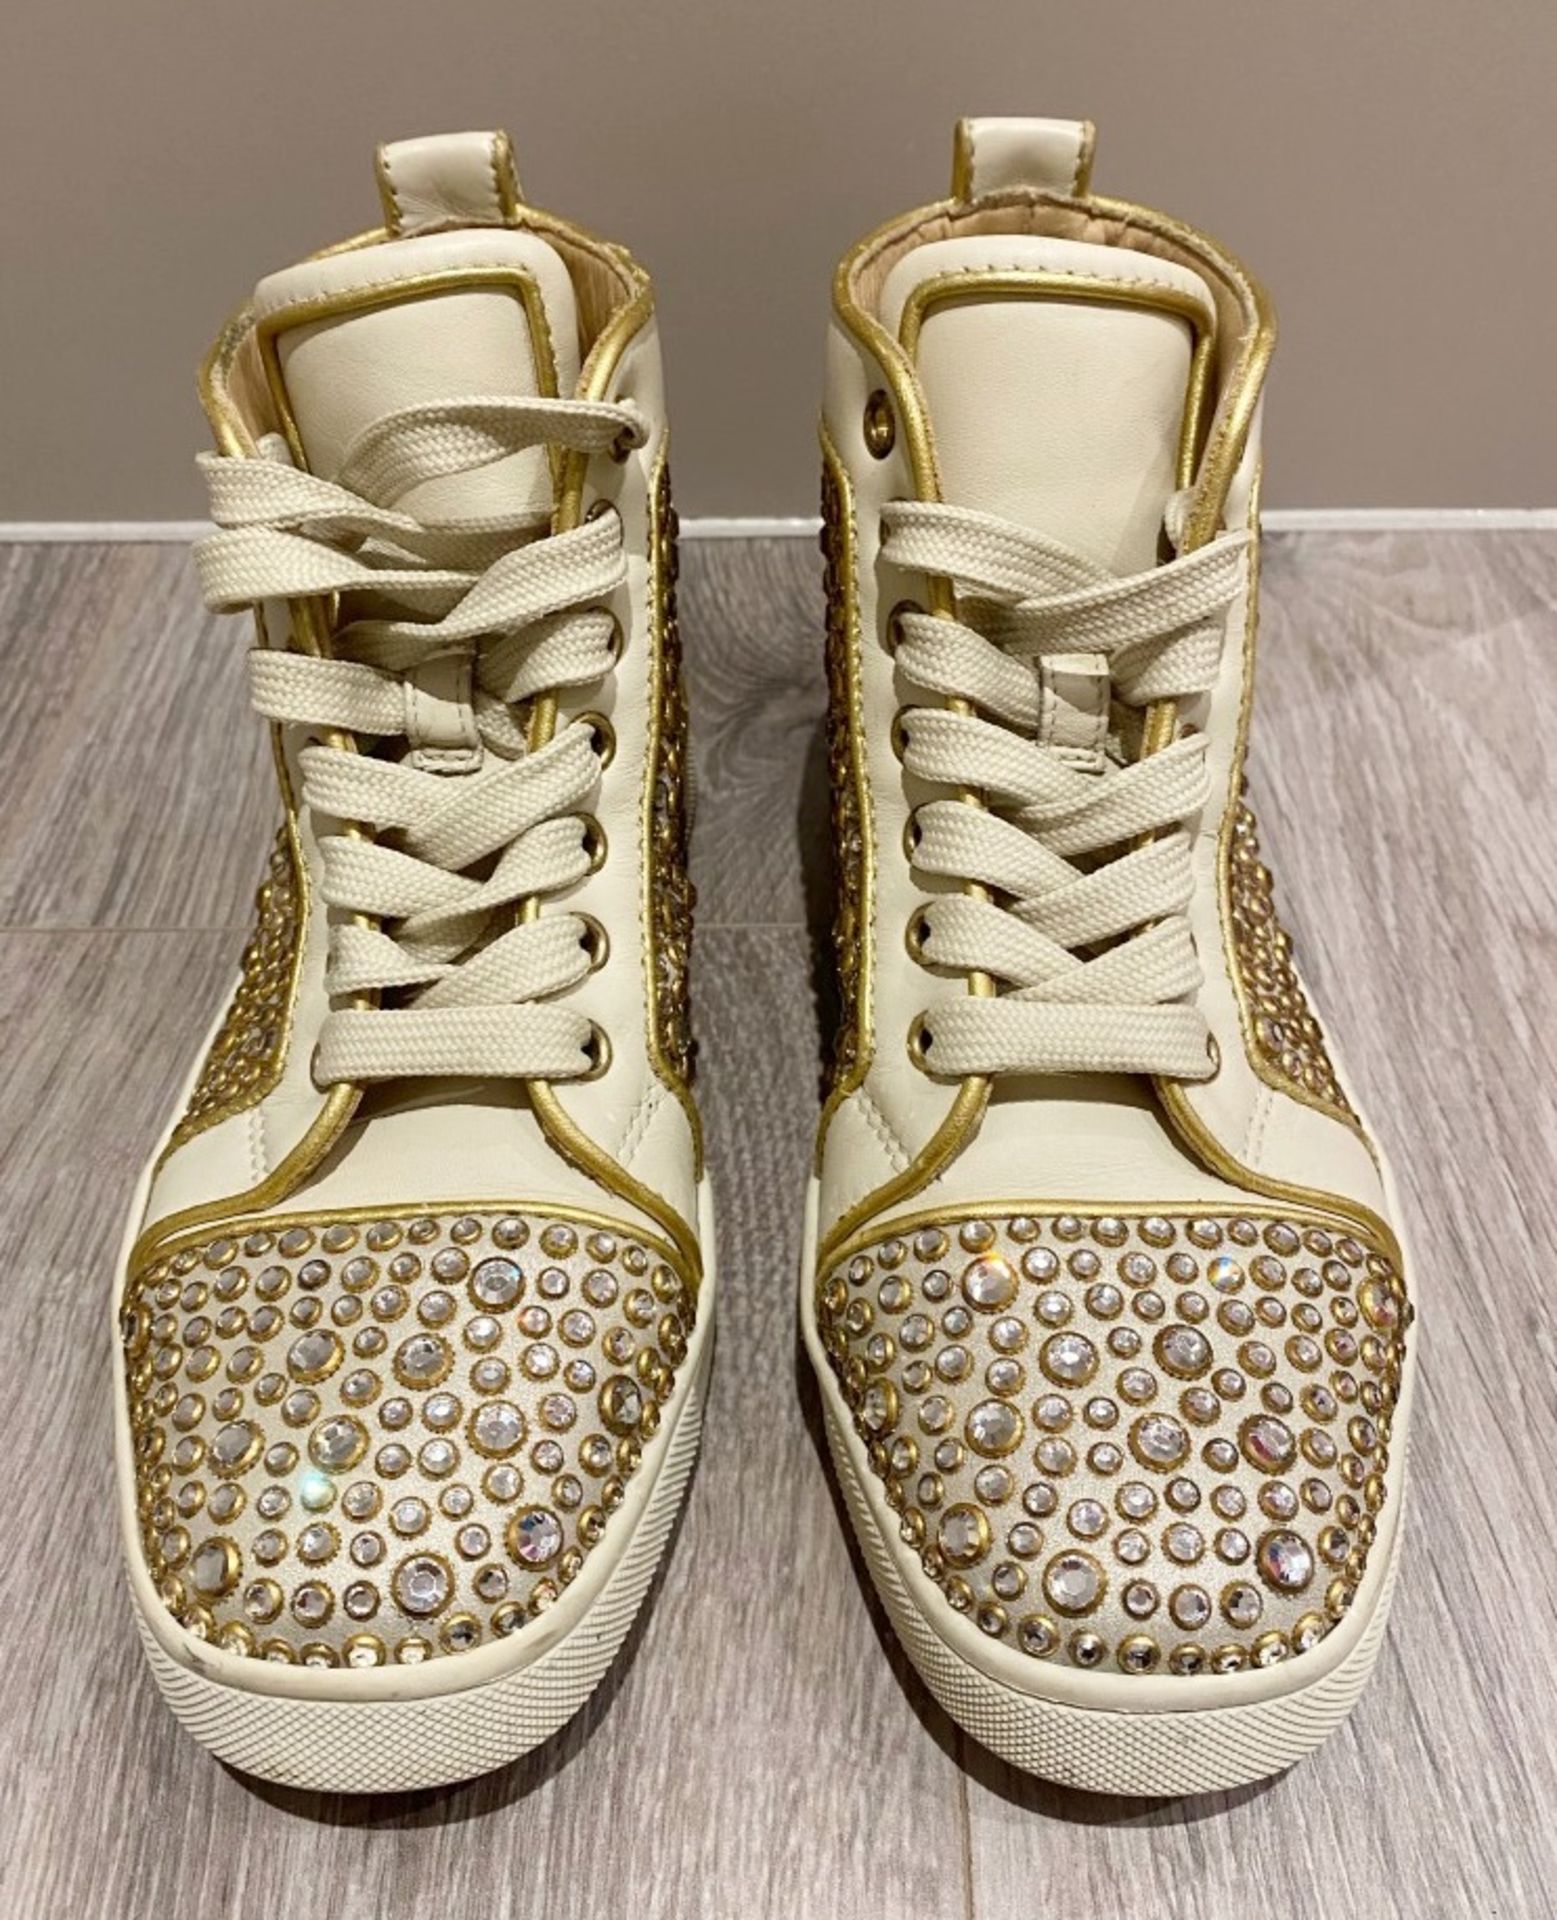 1 x Pair Of Genuine Christain Louboutin Sneakers In Crème And Silver - Size: 35 - Preowned in Worn C - Image 2 of 5